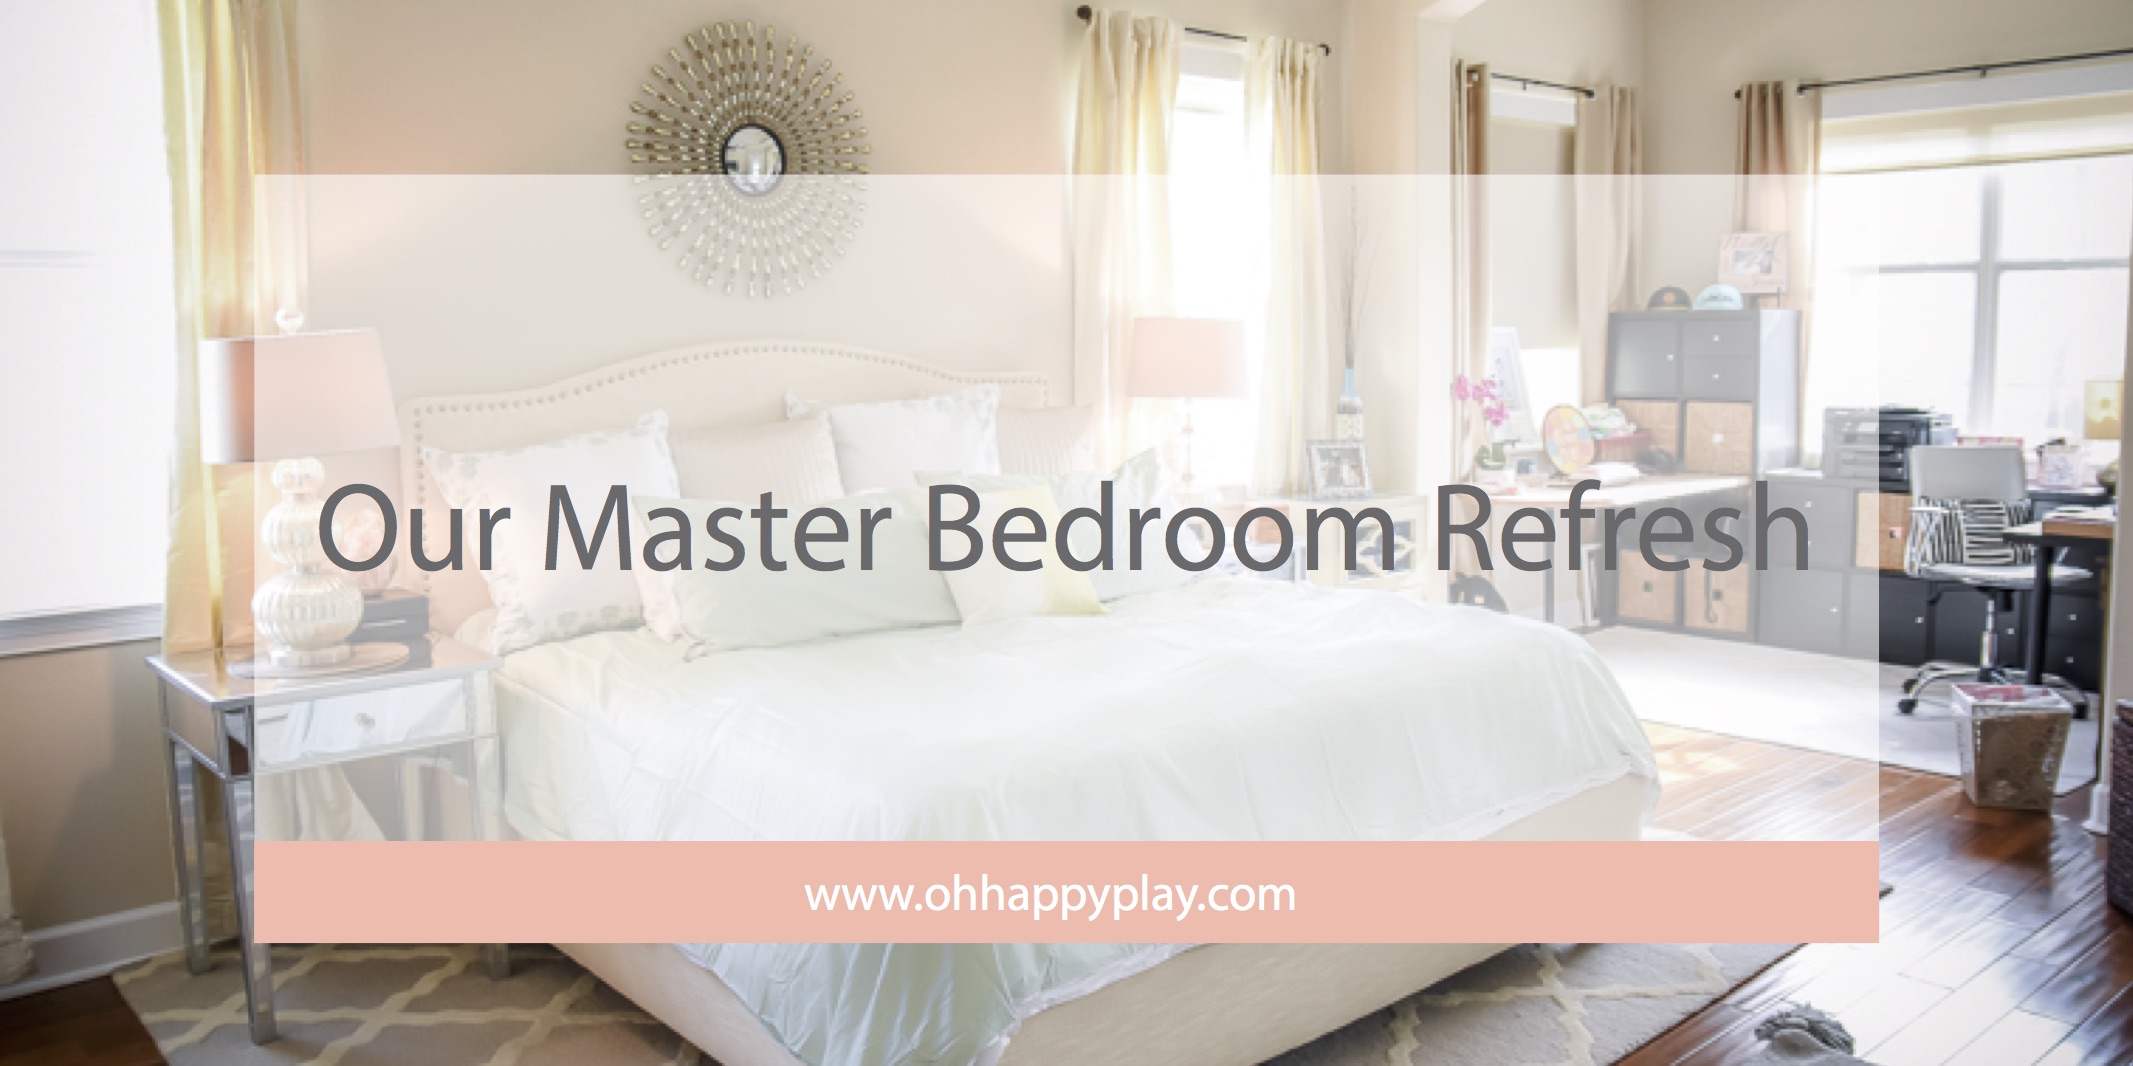 Our Master Bedroom Refresh